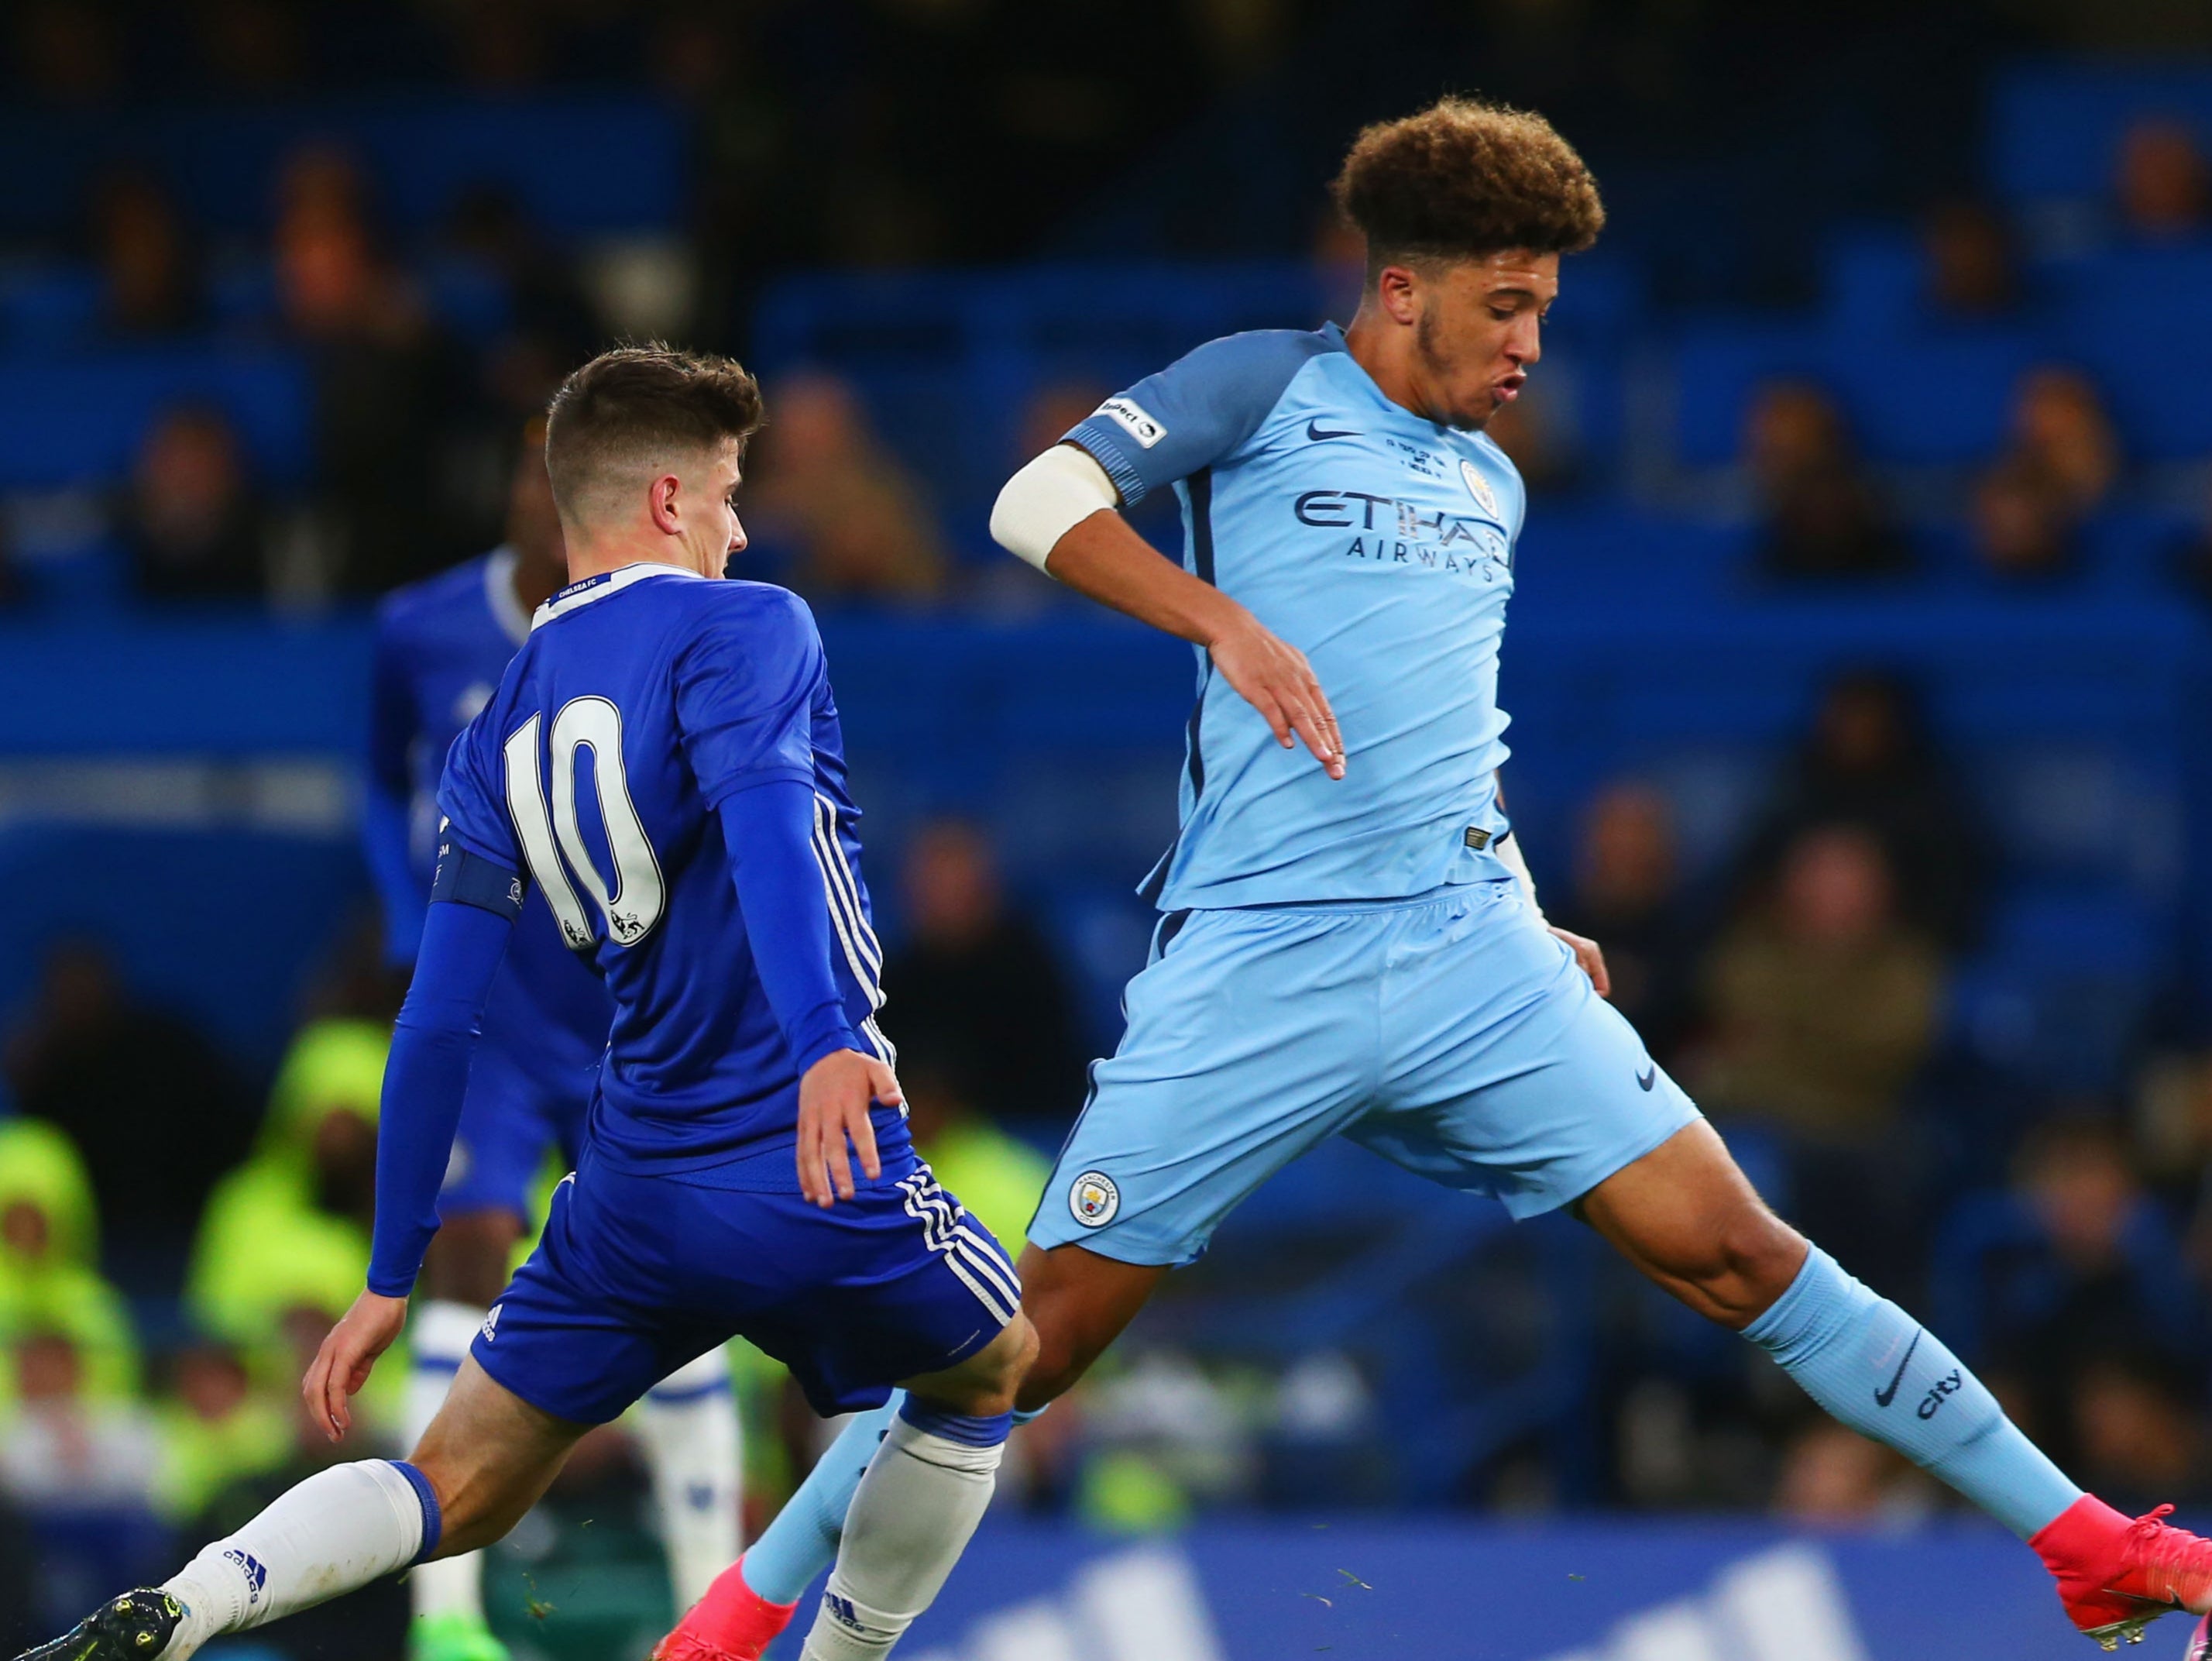 Former Manchester City youngster Jadon Sancho